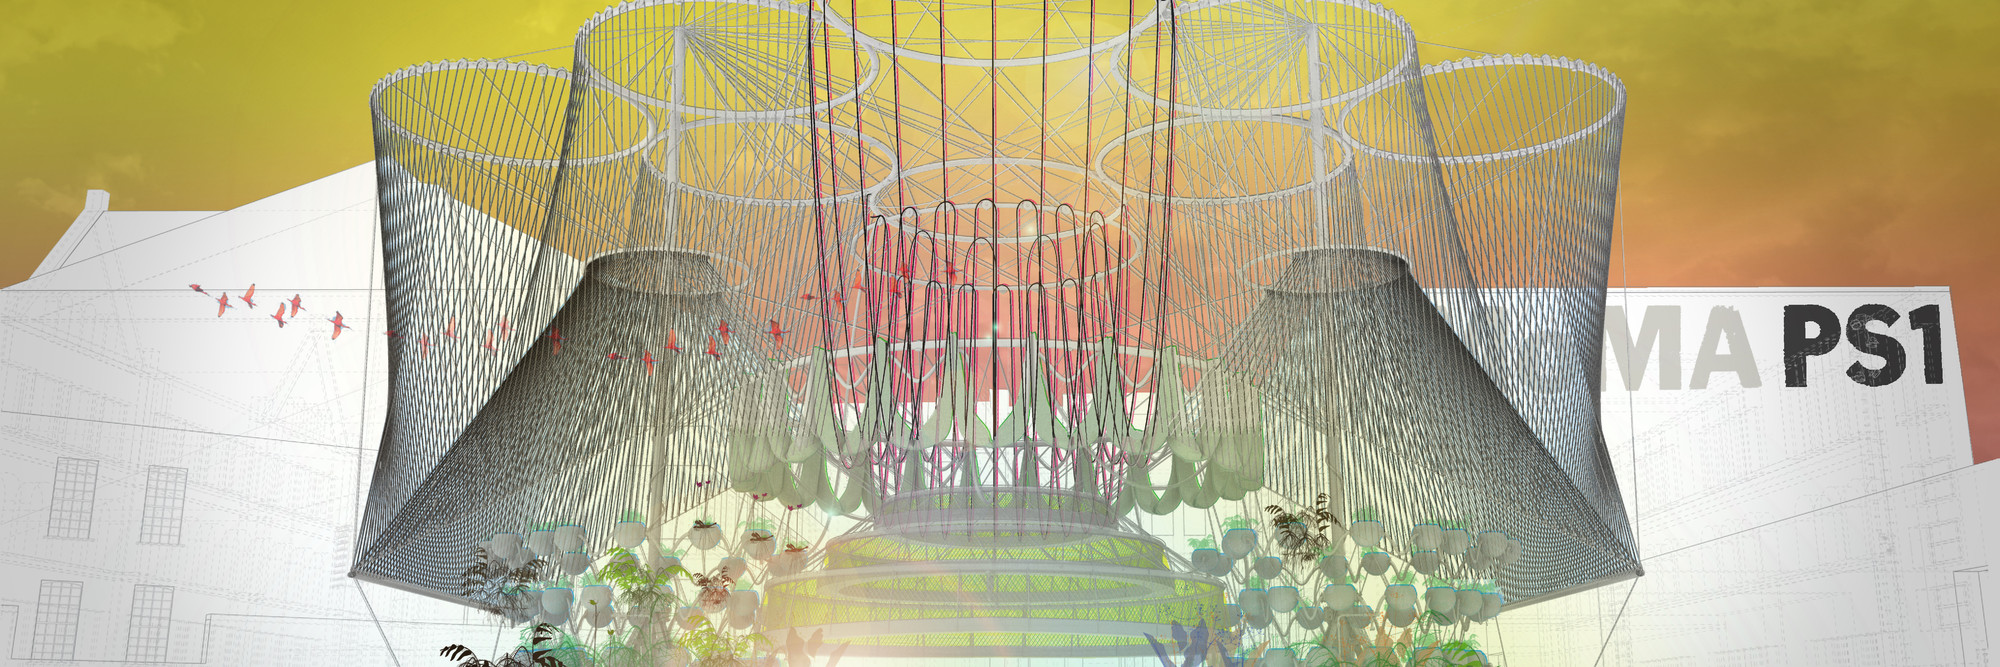 Andrés Jaque / Office for Political Innovation. COSMO. 2015. Young Architects Program 2015, MoMA PS1, New York, winner